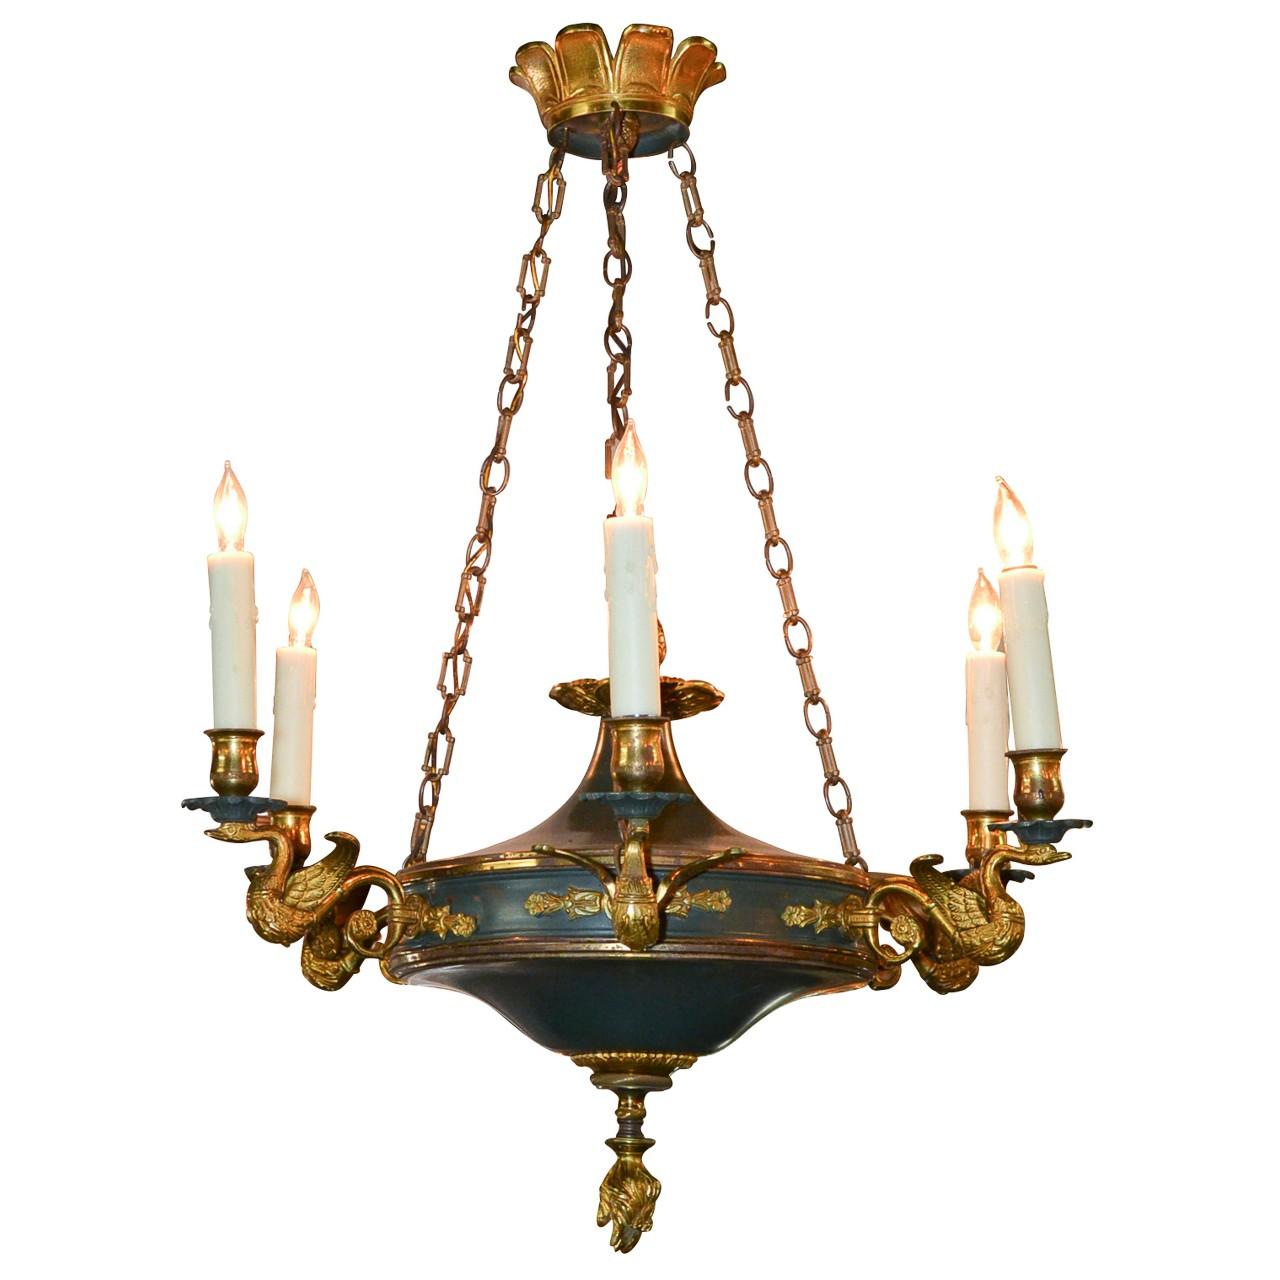 19th Century, French Empire Tole and Brass Chandelier